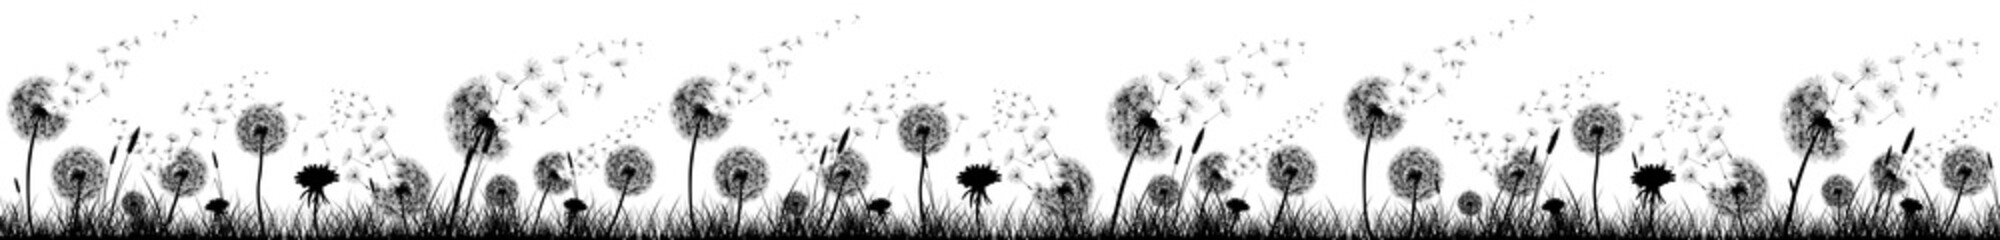 Fototapeta Dandelions, Flowers and Grass High Quality Kitchen Design - Silhouette / Shapes - Black and White Background obraz